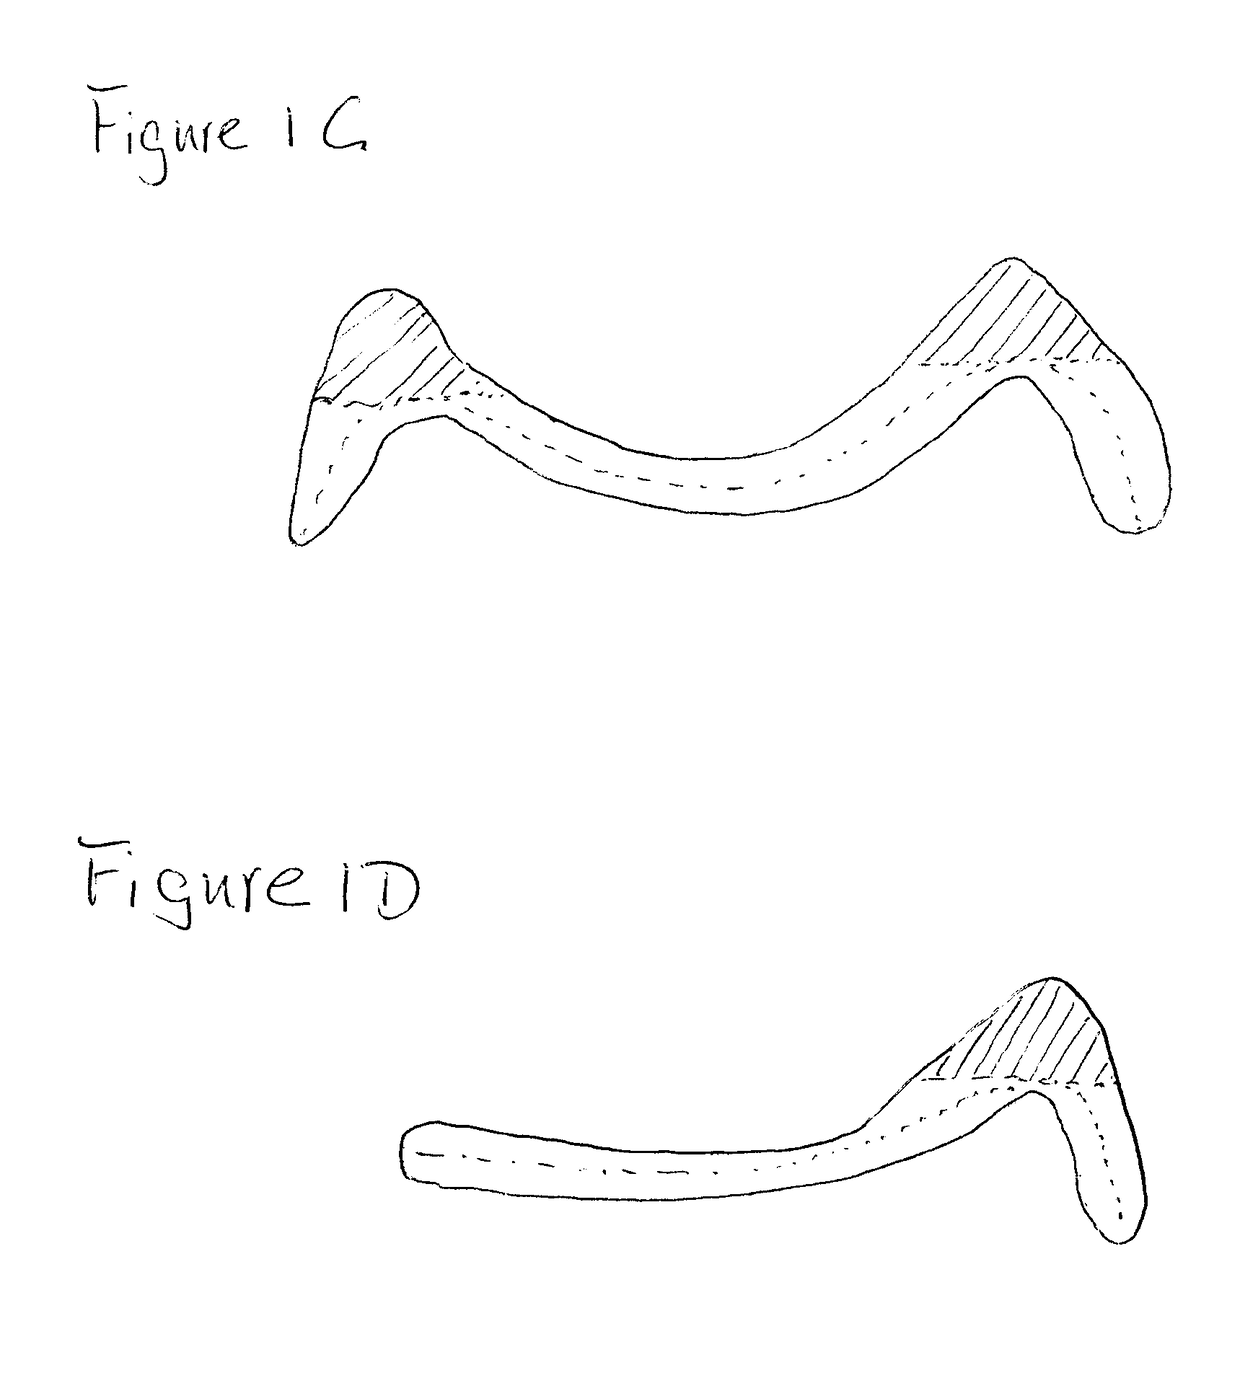 Three-dimensional fabricating material systems and methods for producing layered dental products